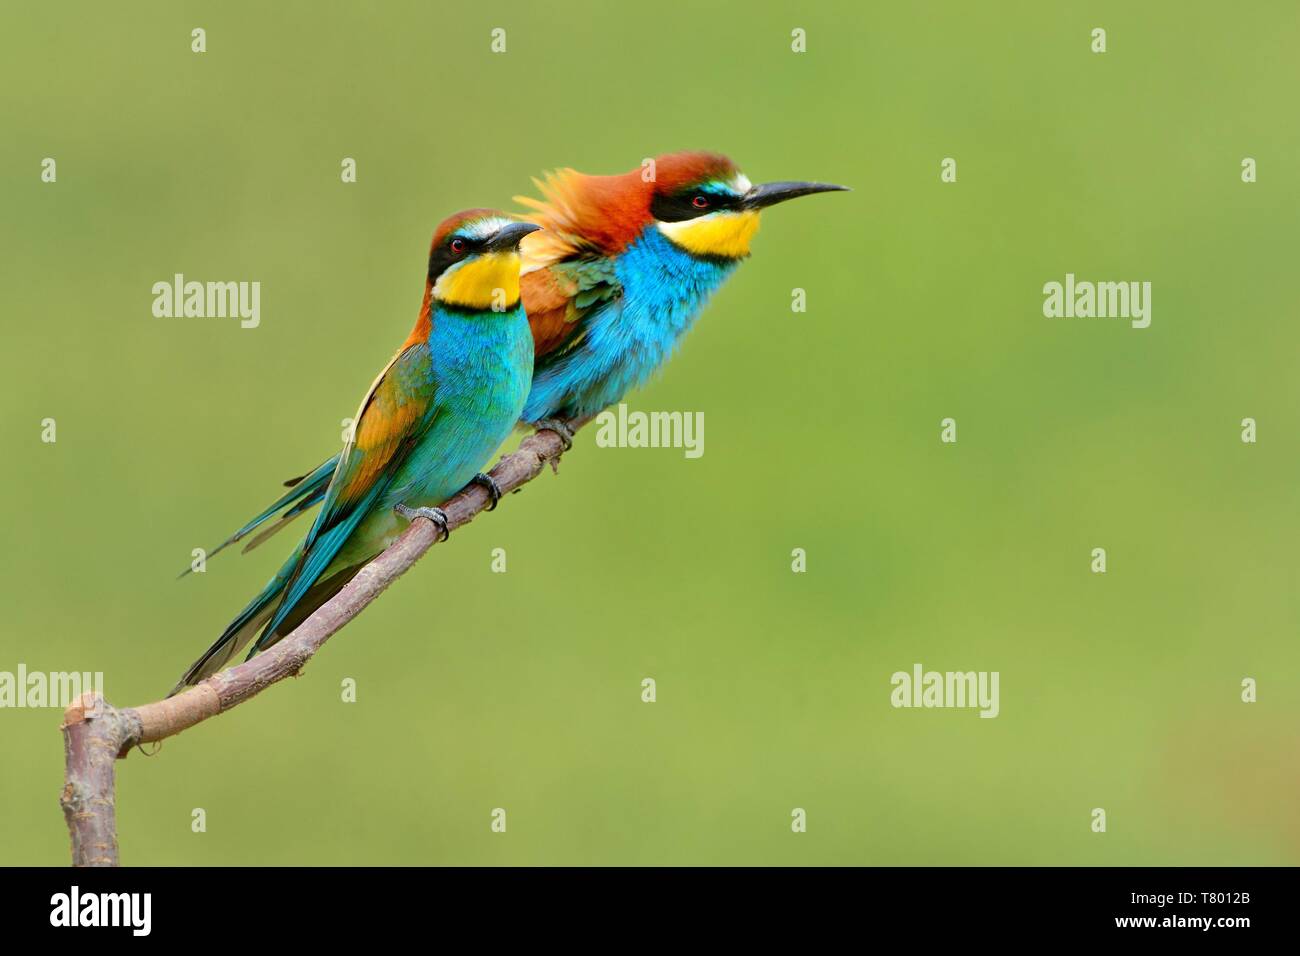 European Bee-eater -  Merops apiaster sitting on the branch with green background. Stock Photo